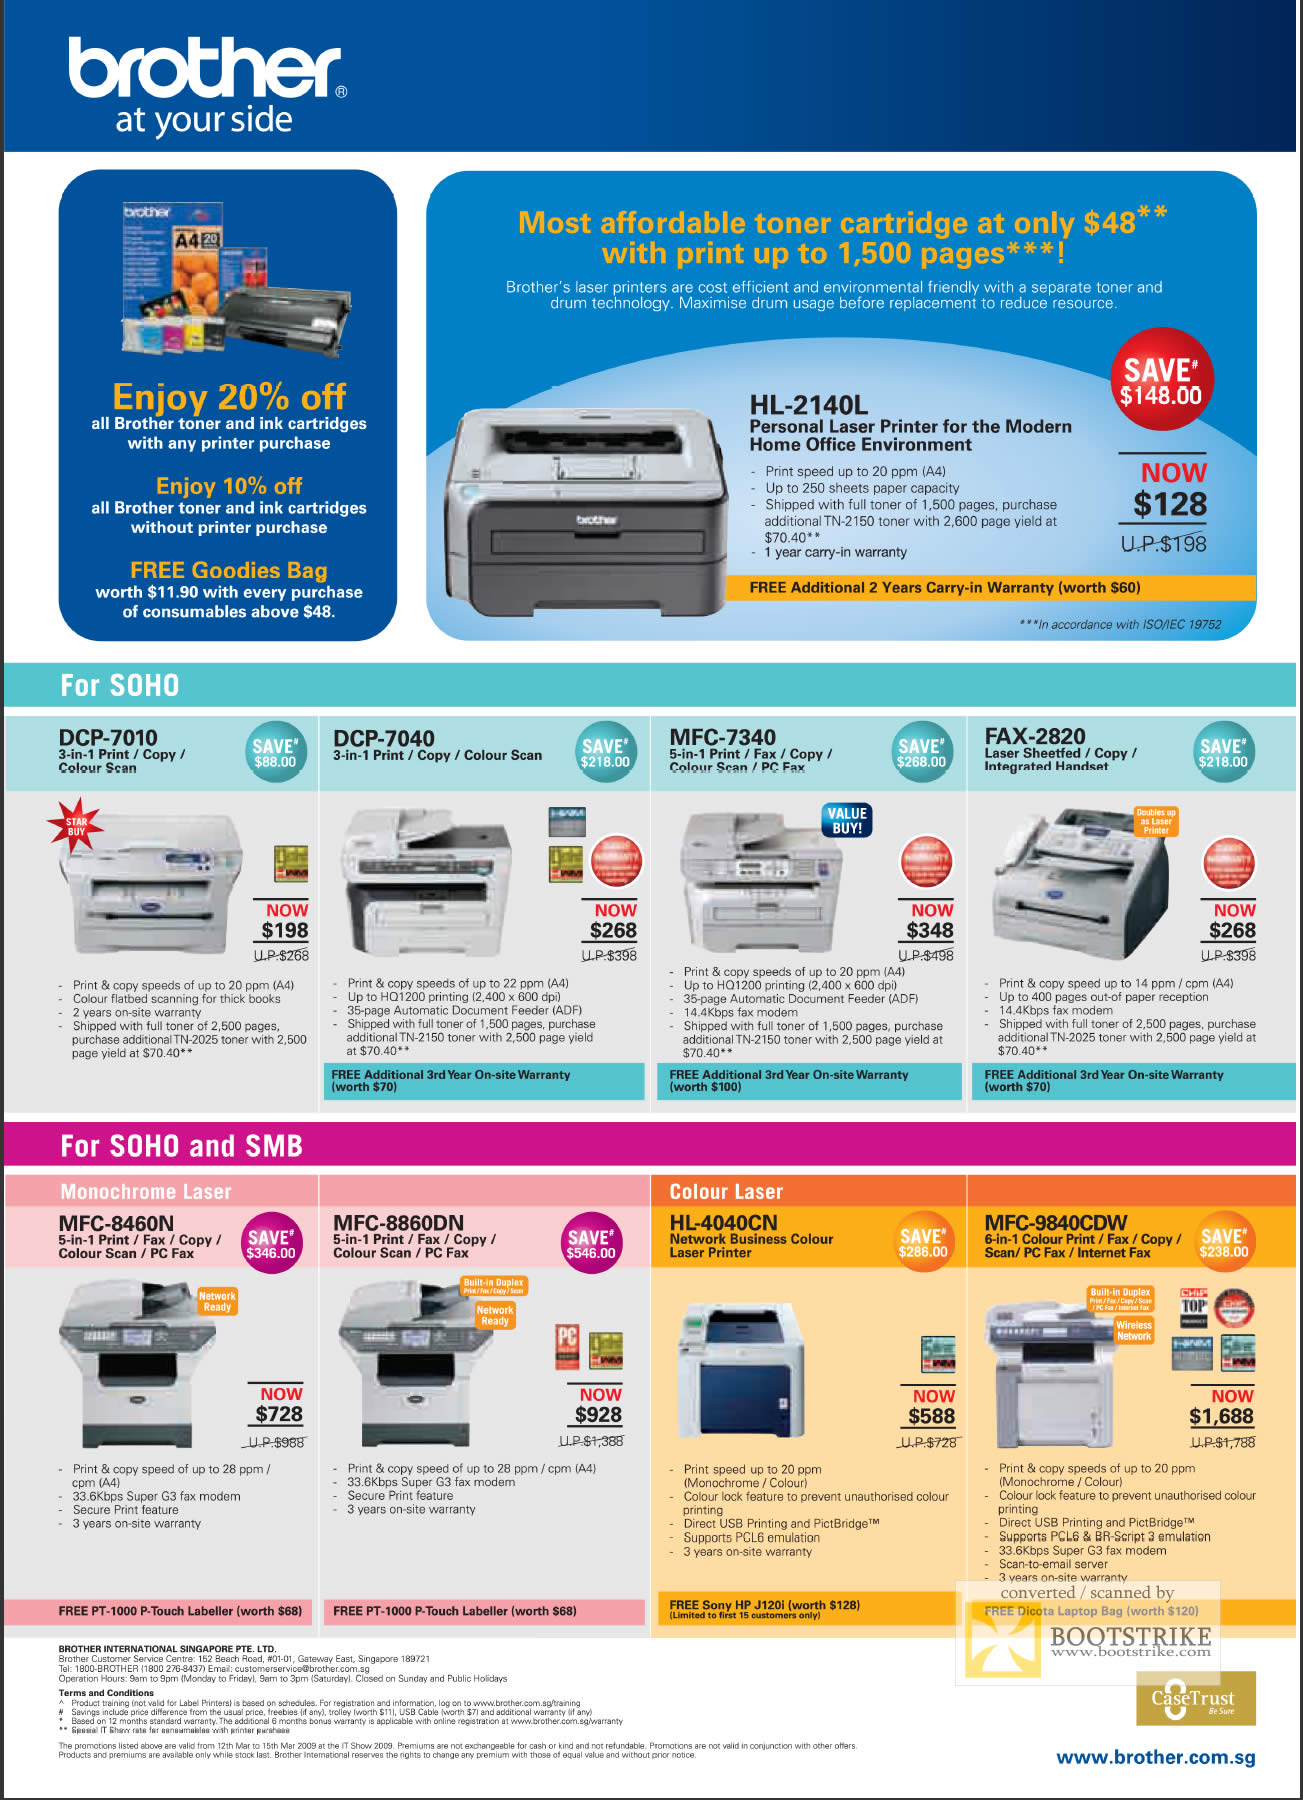 IT Show 2009 price list image brochure of Brother Laser Printers Toners